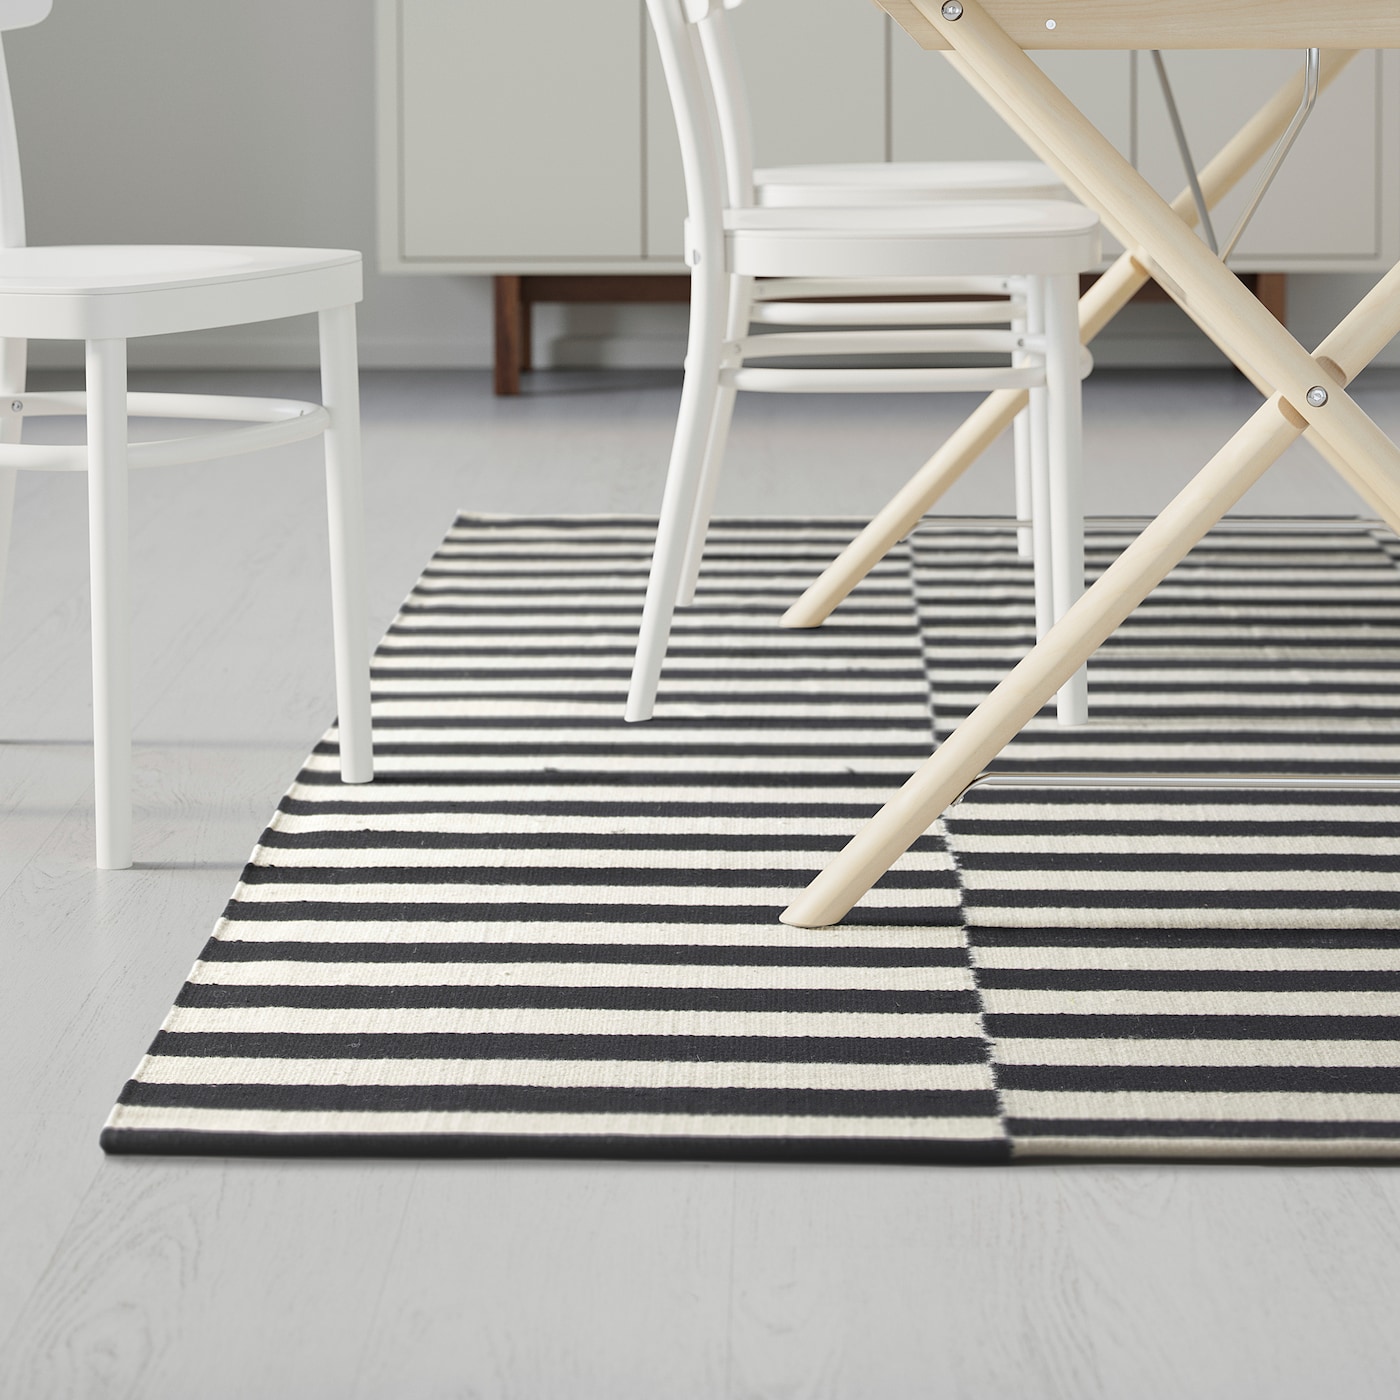 Stockholm Rug From IKEA 32117 